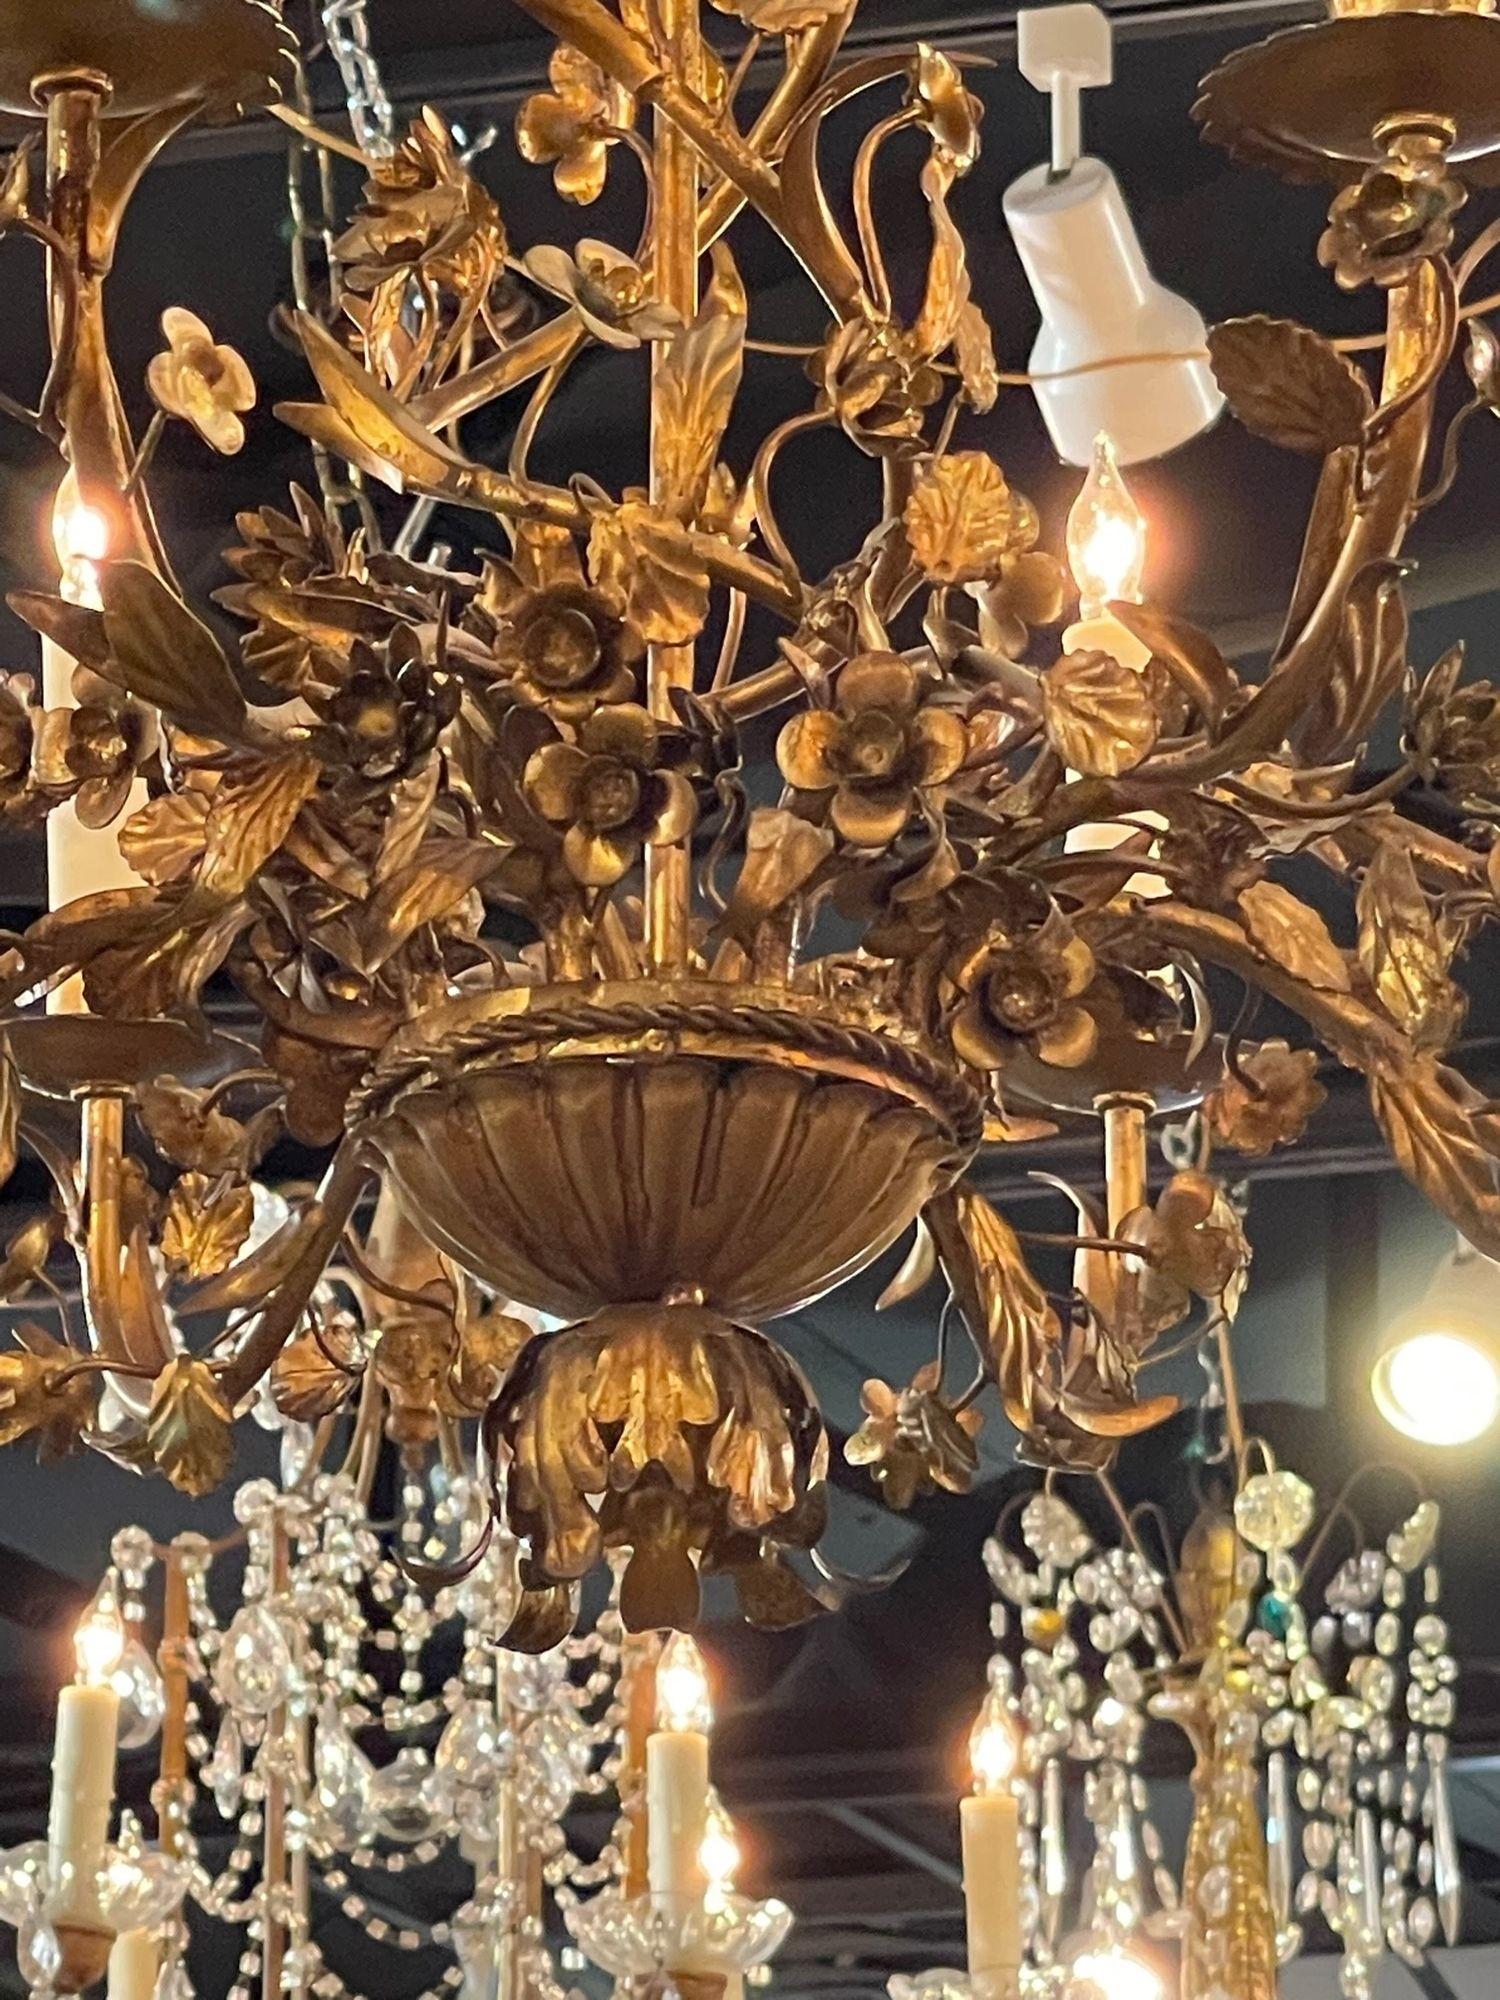 Metal 19th Century Italian Gilt Tole Floral Chandeliers with 8 Lights